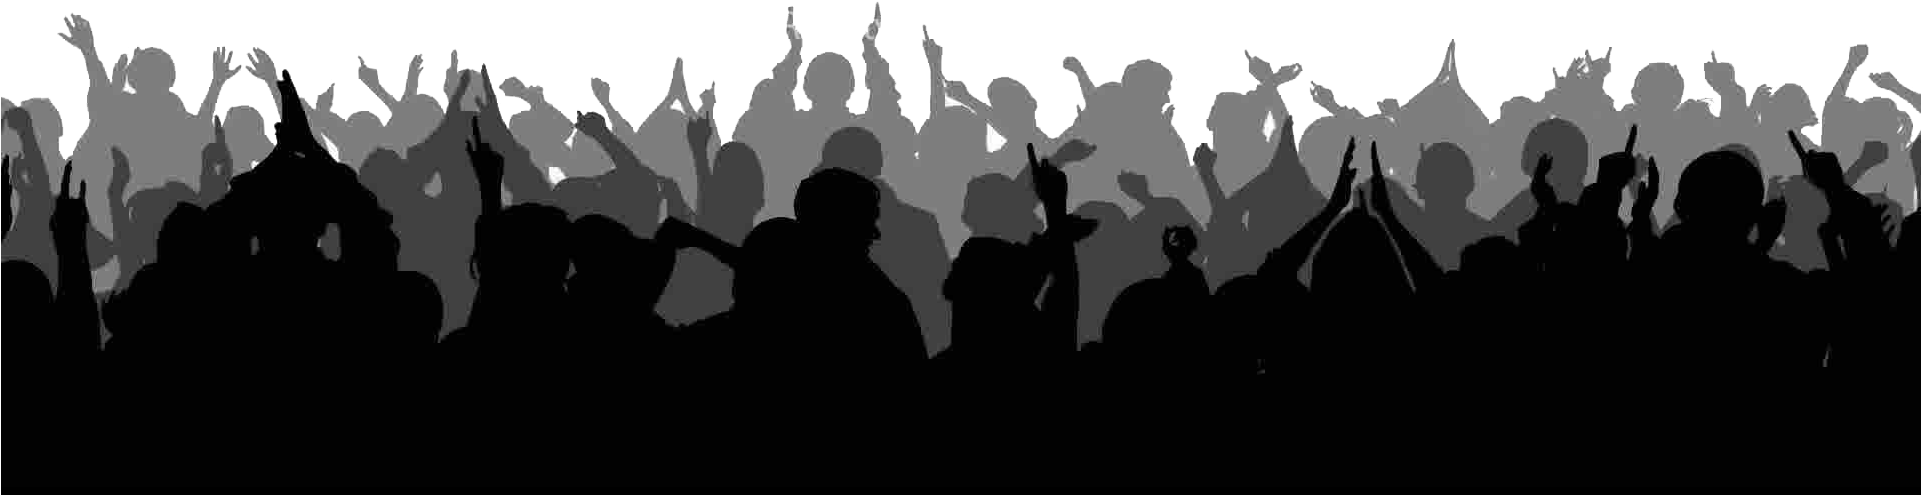 Excited Crowd Silhouette PNG